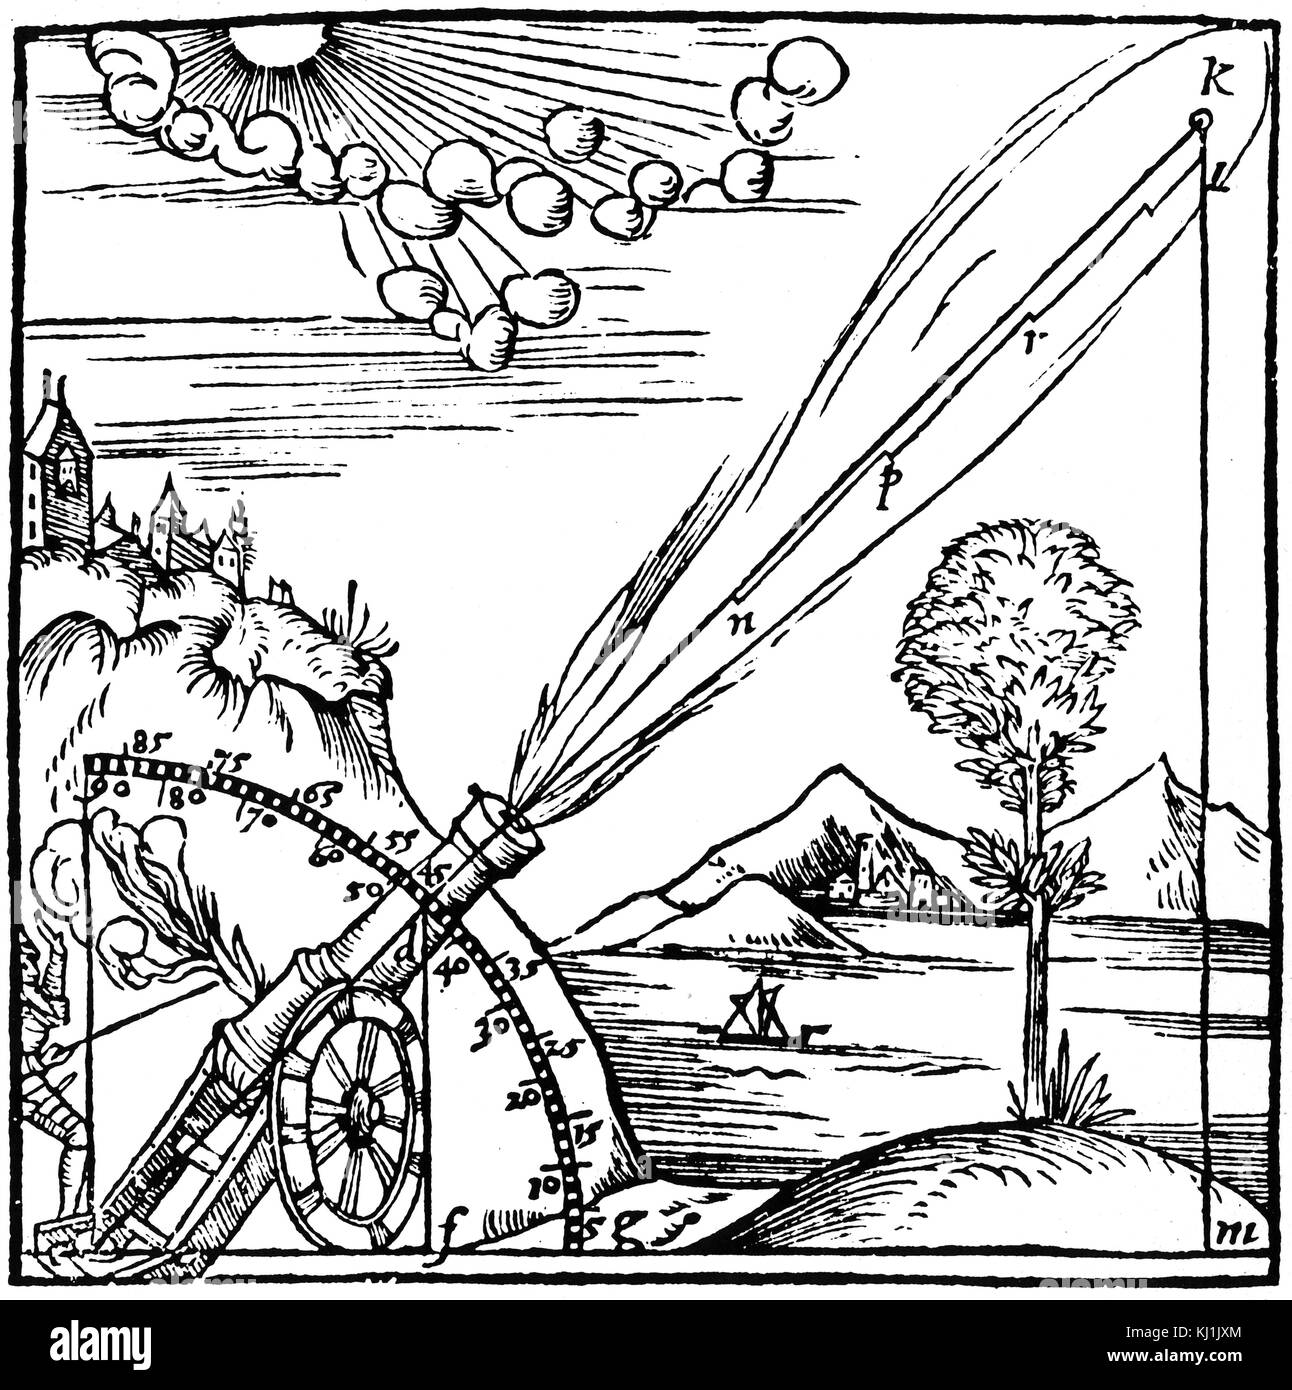 Engraving depicting the Aristotelian concept of the path of projectile. Since he believed no body could undertake more than one motion at a time, the path had to consist of two separate motions in a straight line. Aristotle (384 BC-322 BC) an ancient Greek philosopher and scientist. Dated 16th Century Stock Photo